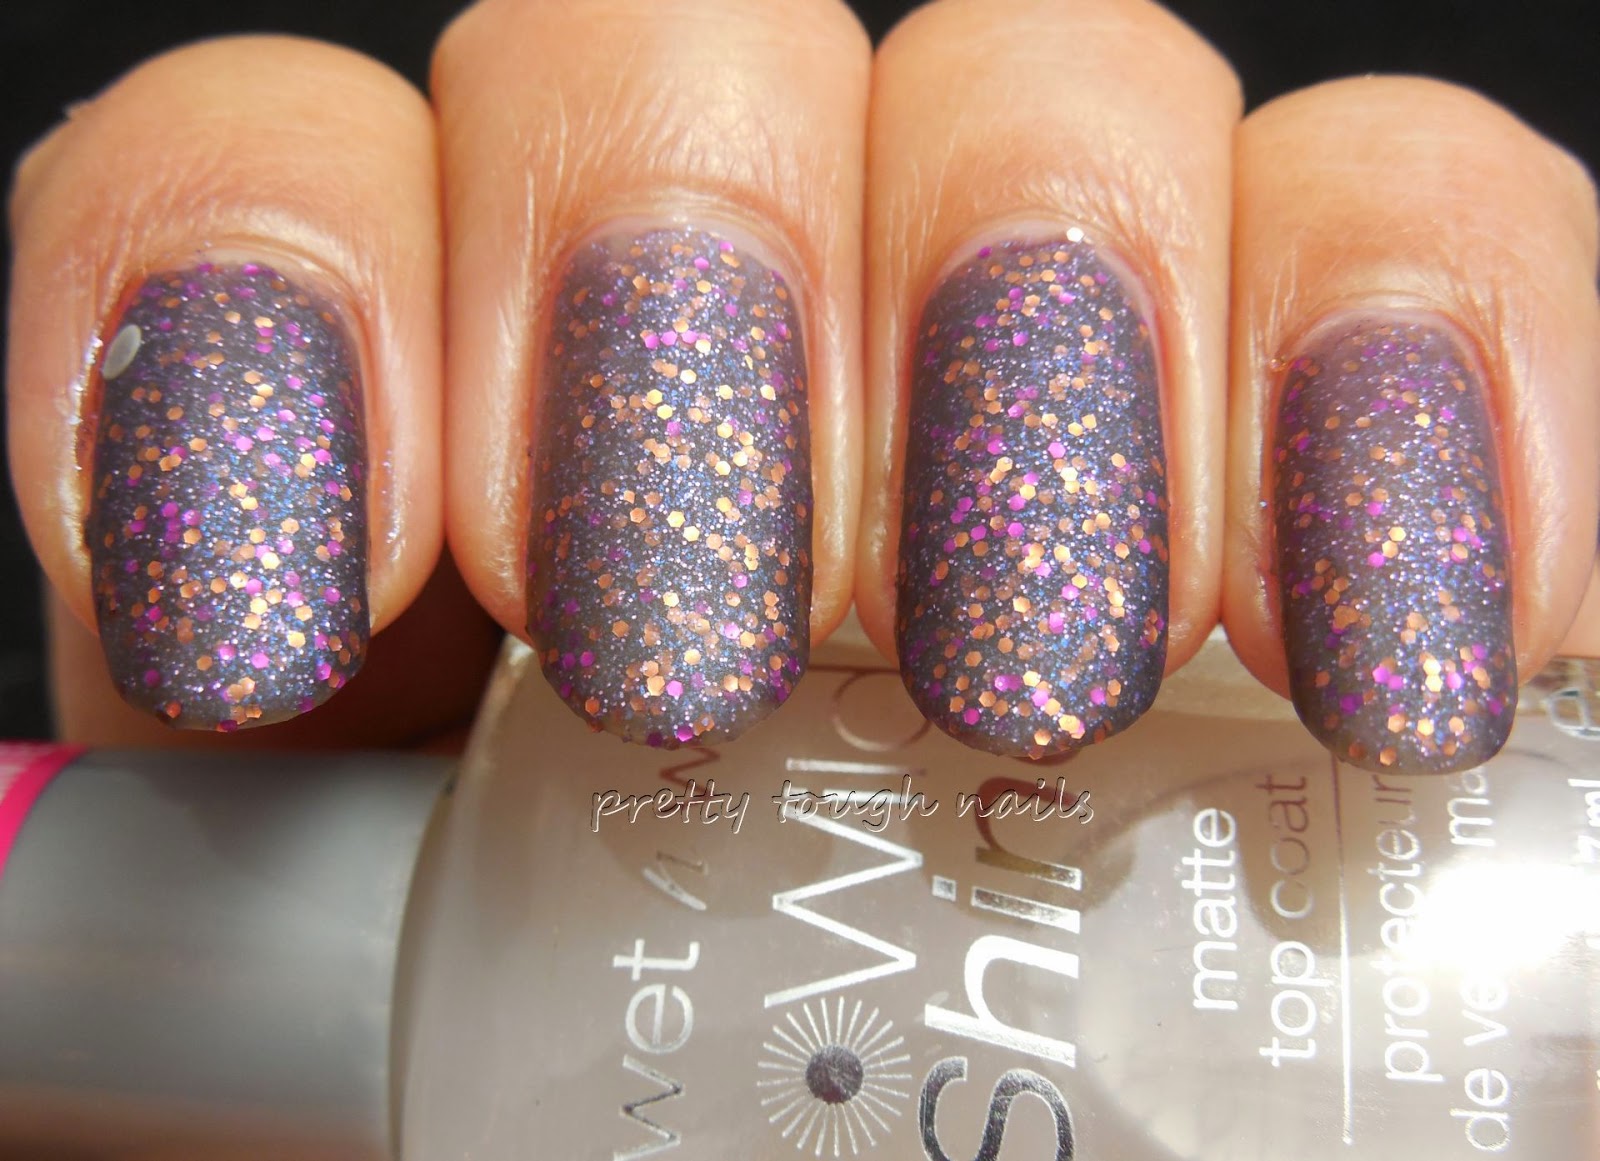 Orly Interglactic Space With Wet 'n' Wild Matte Topcoat